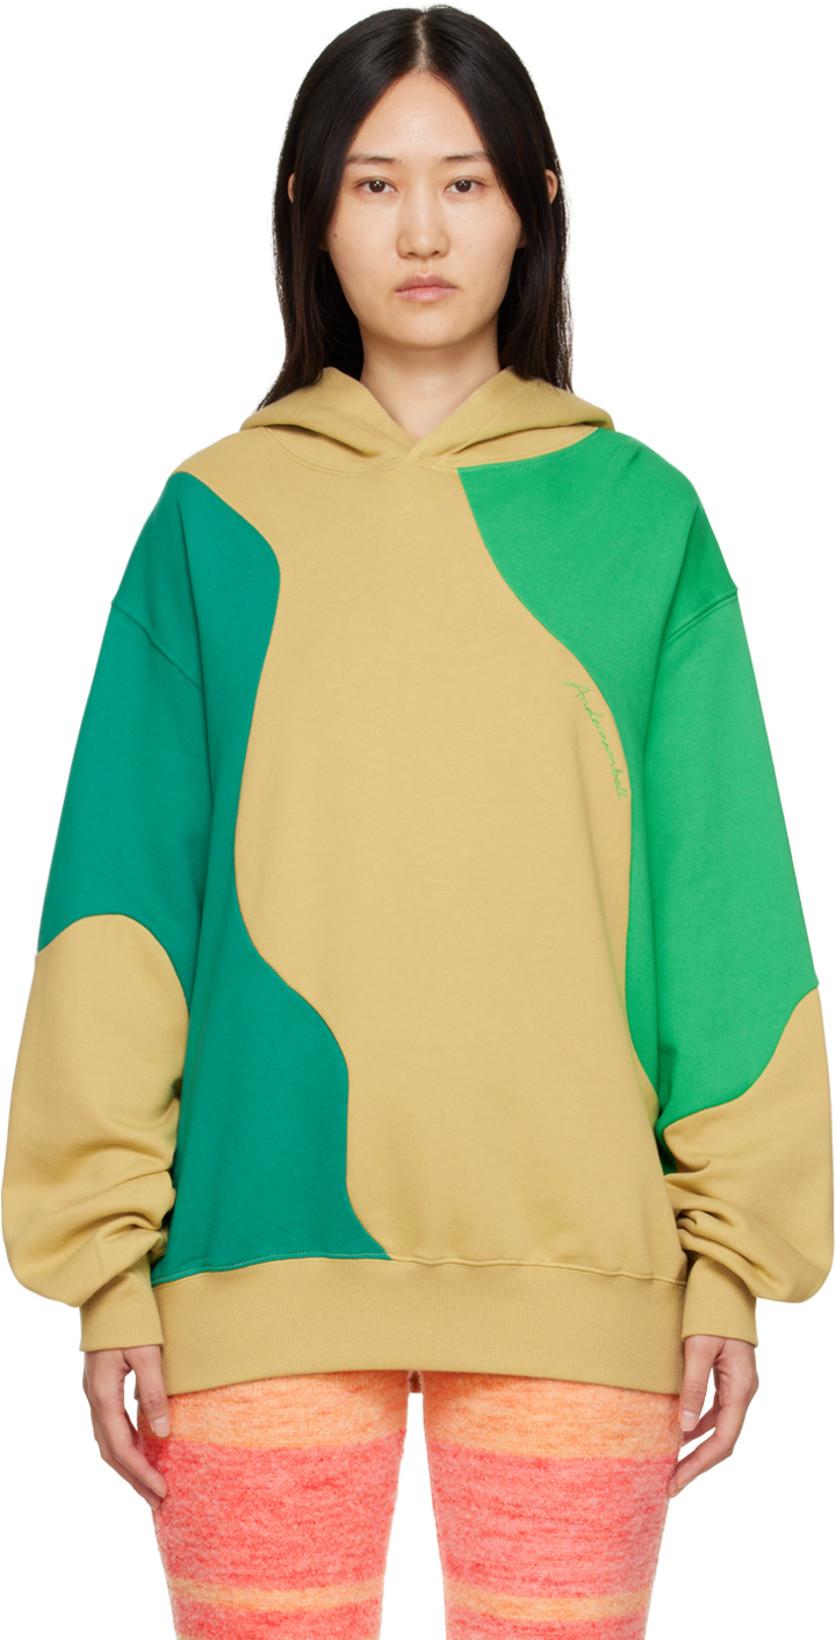 Green & Tan Curved Hoodie by ANDERSSON BELL